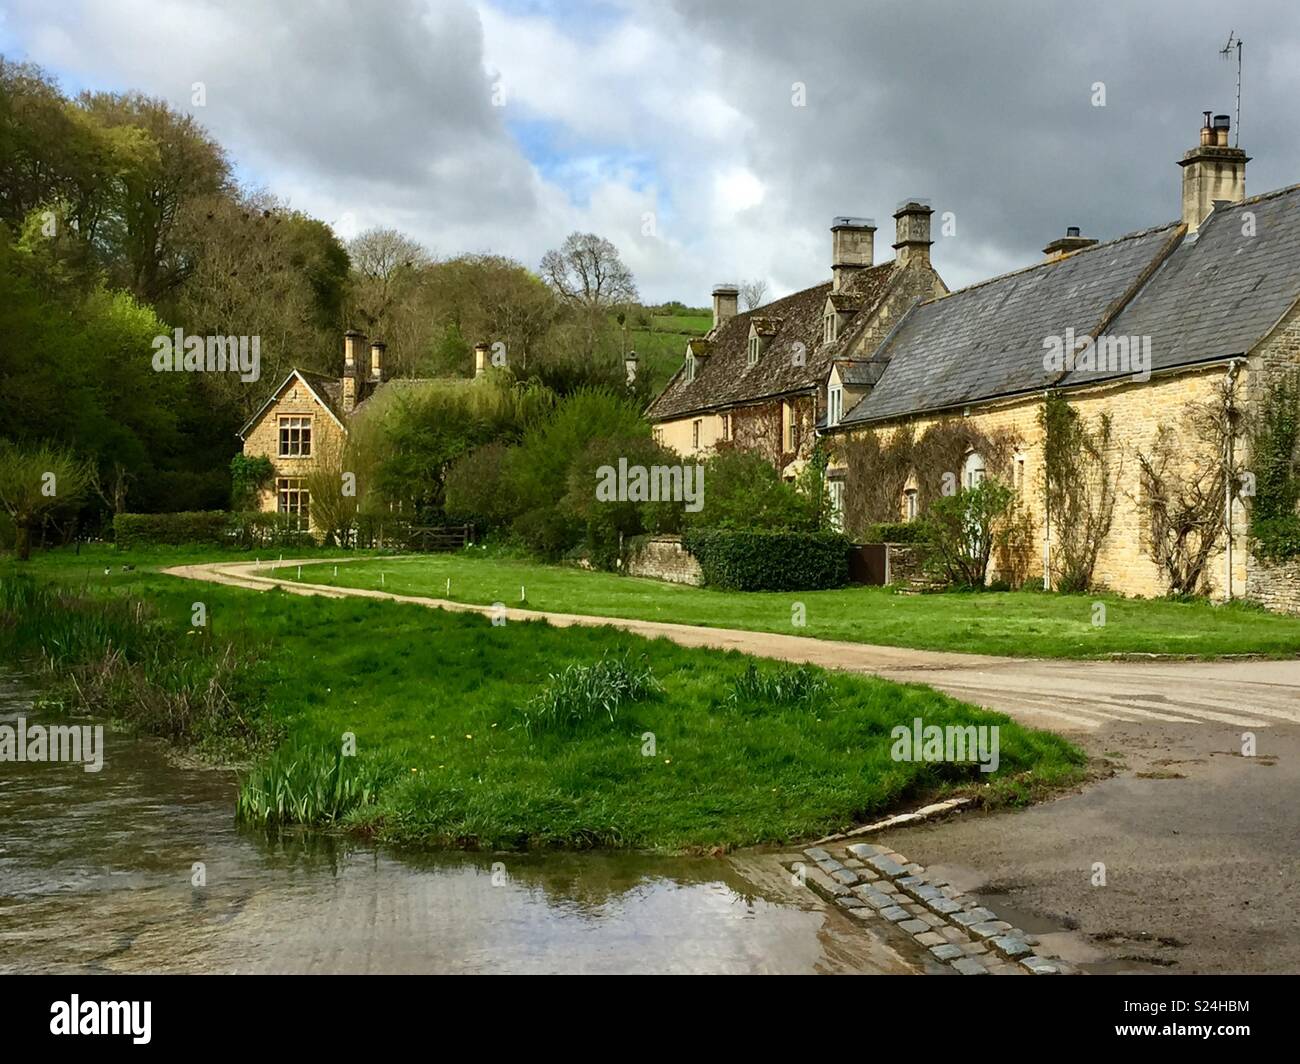 A ford through the River Eye which connects both sides of the Cotswolds village of Upper Slaughter. With cottages and climbers in background. Gloucestershire, United Kingdom Stock Photo